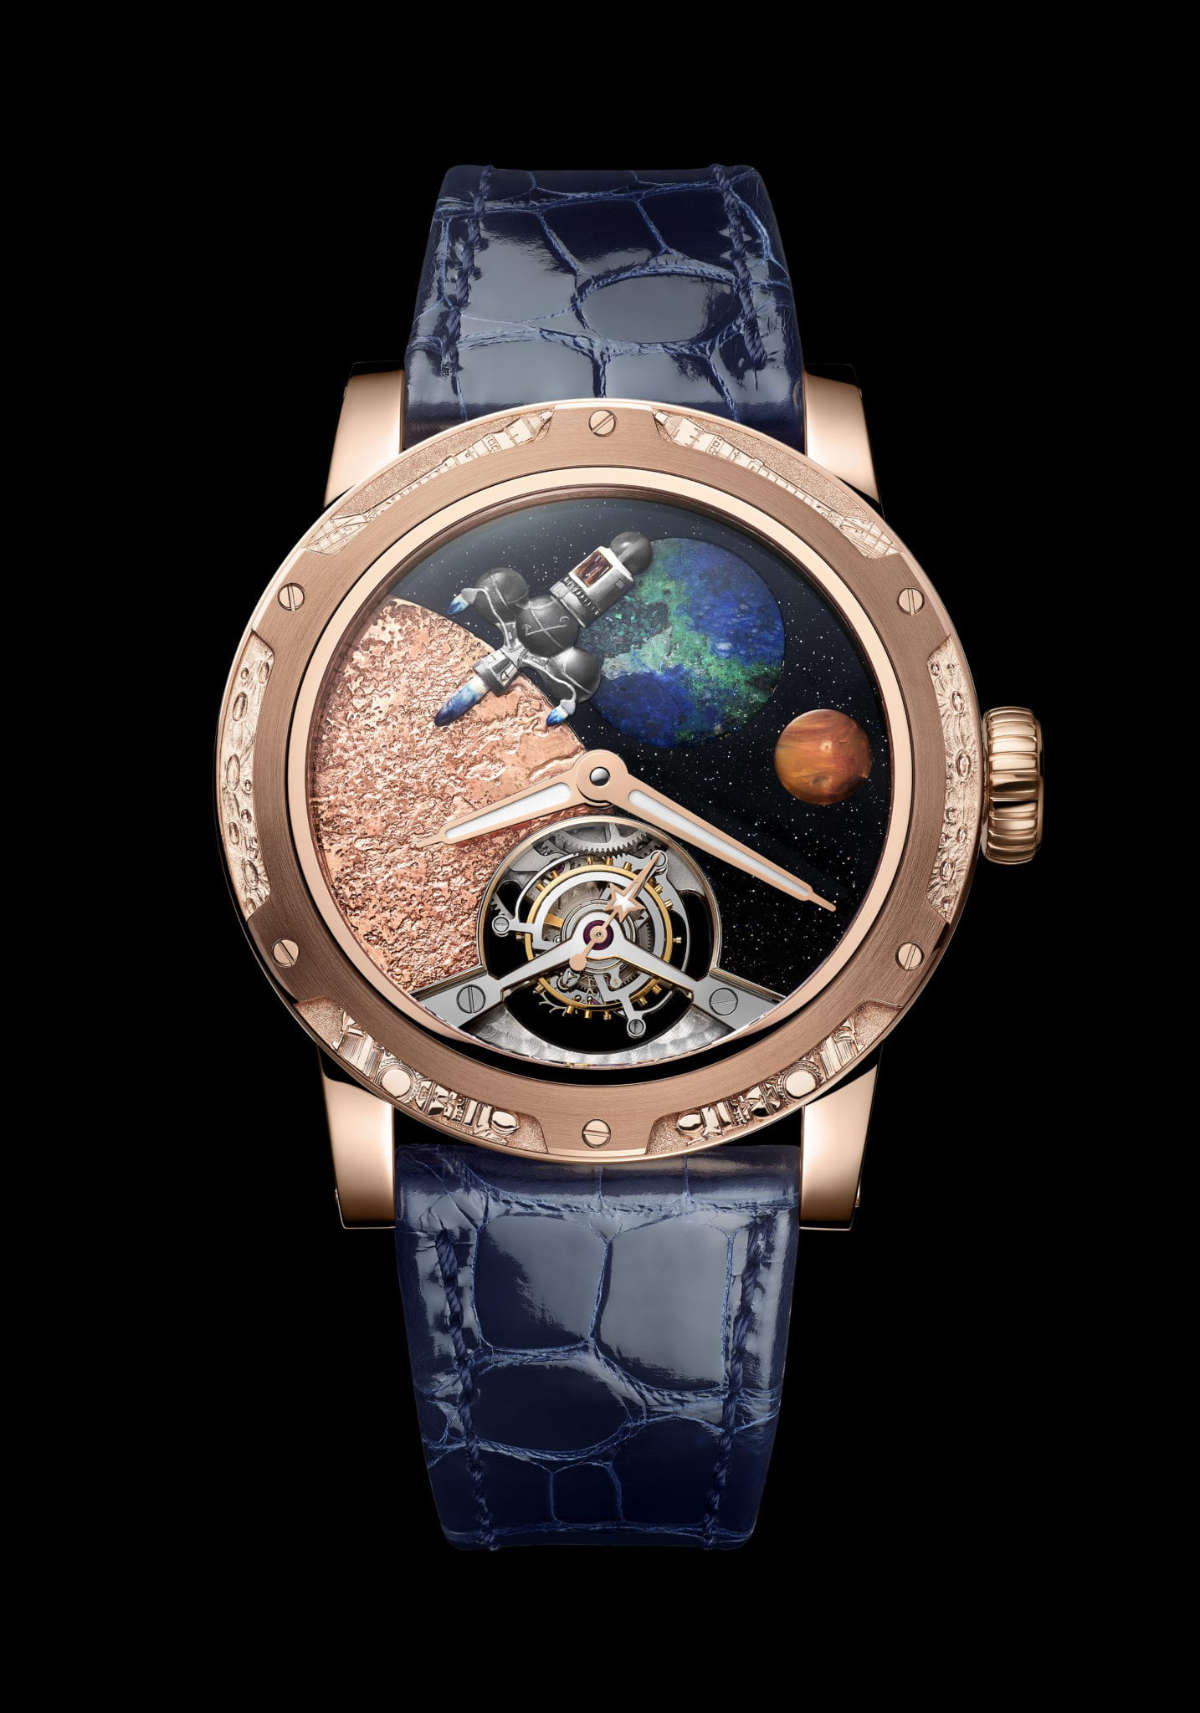 Louis Moinet's Presents Its Moon Race Watch Collection, A Journey Through The Space